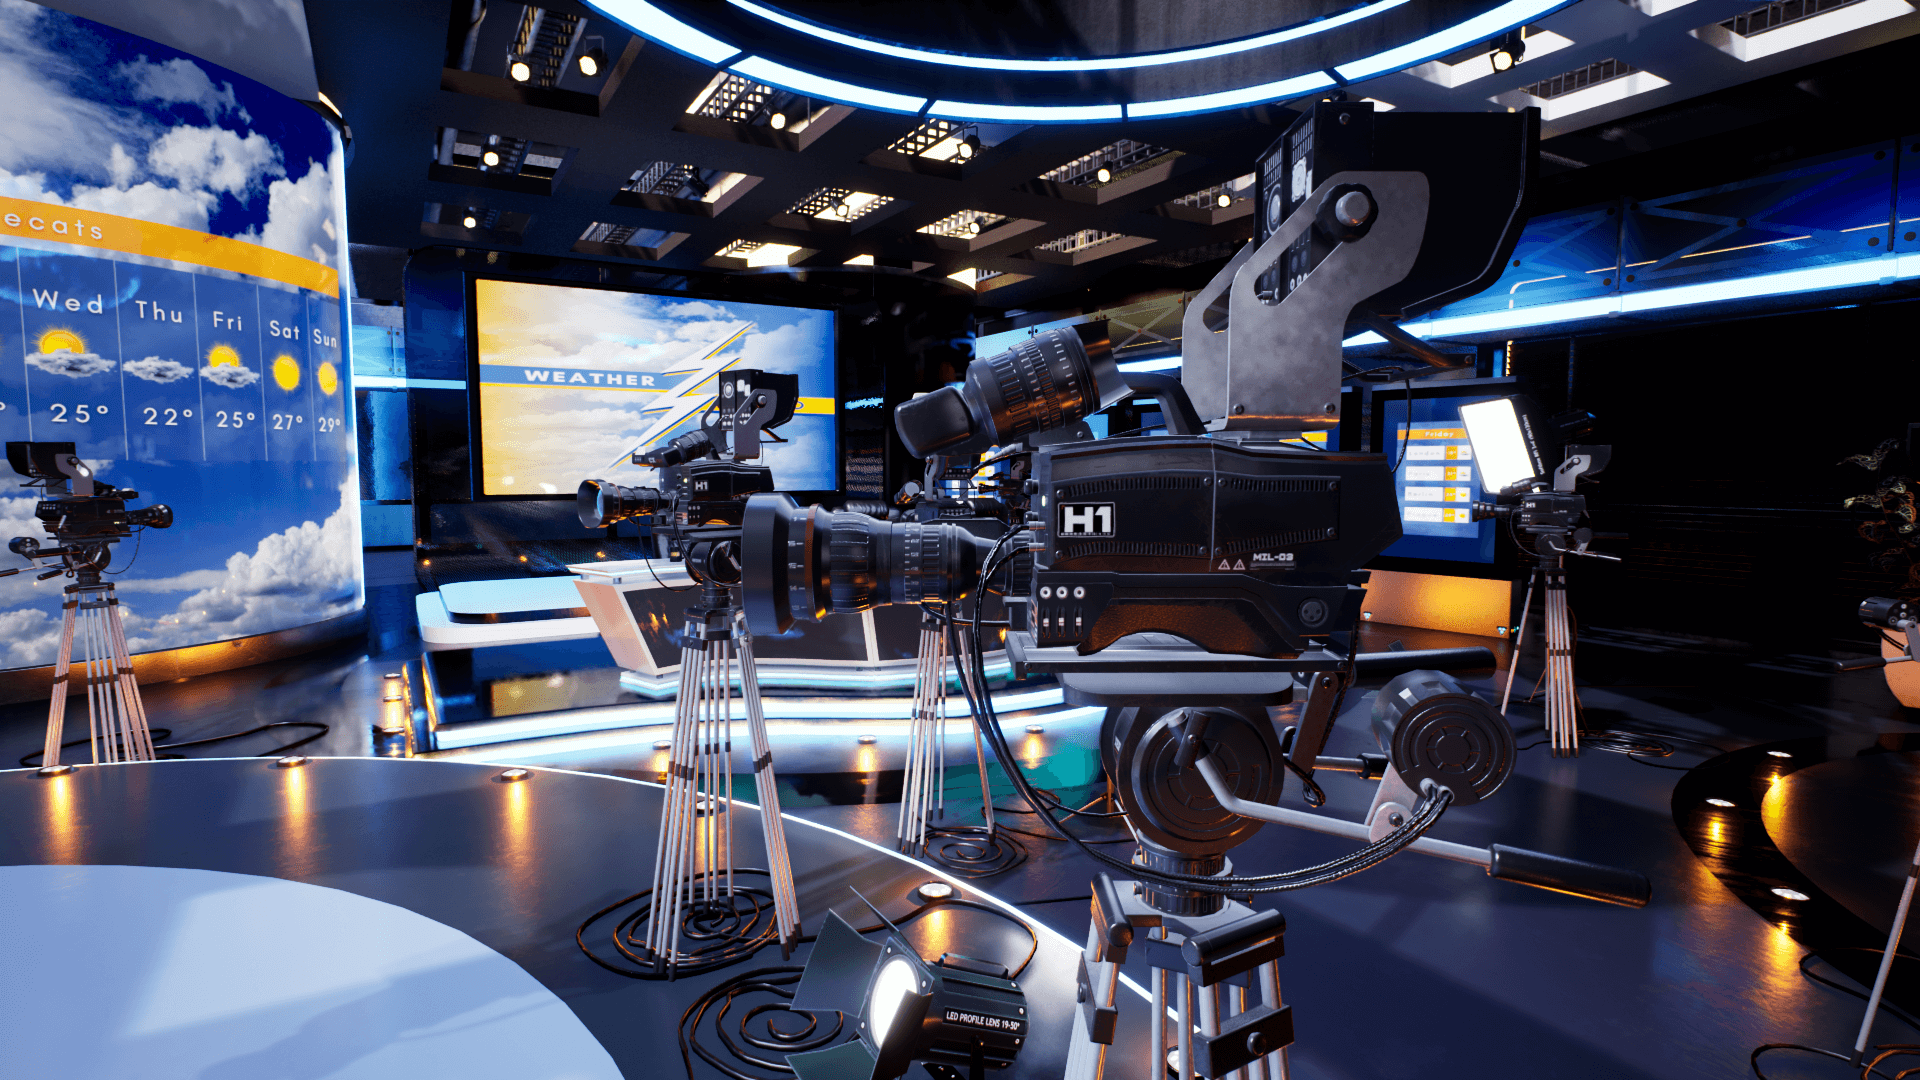 An image showing Weather TV Studio 2 asset pack, created with Unreal Engine